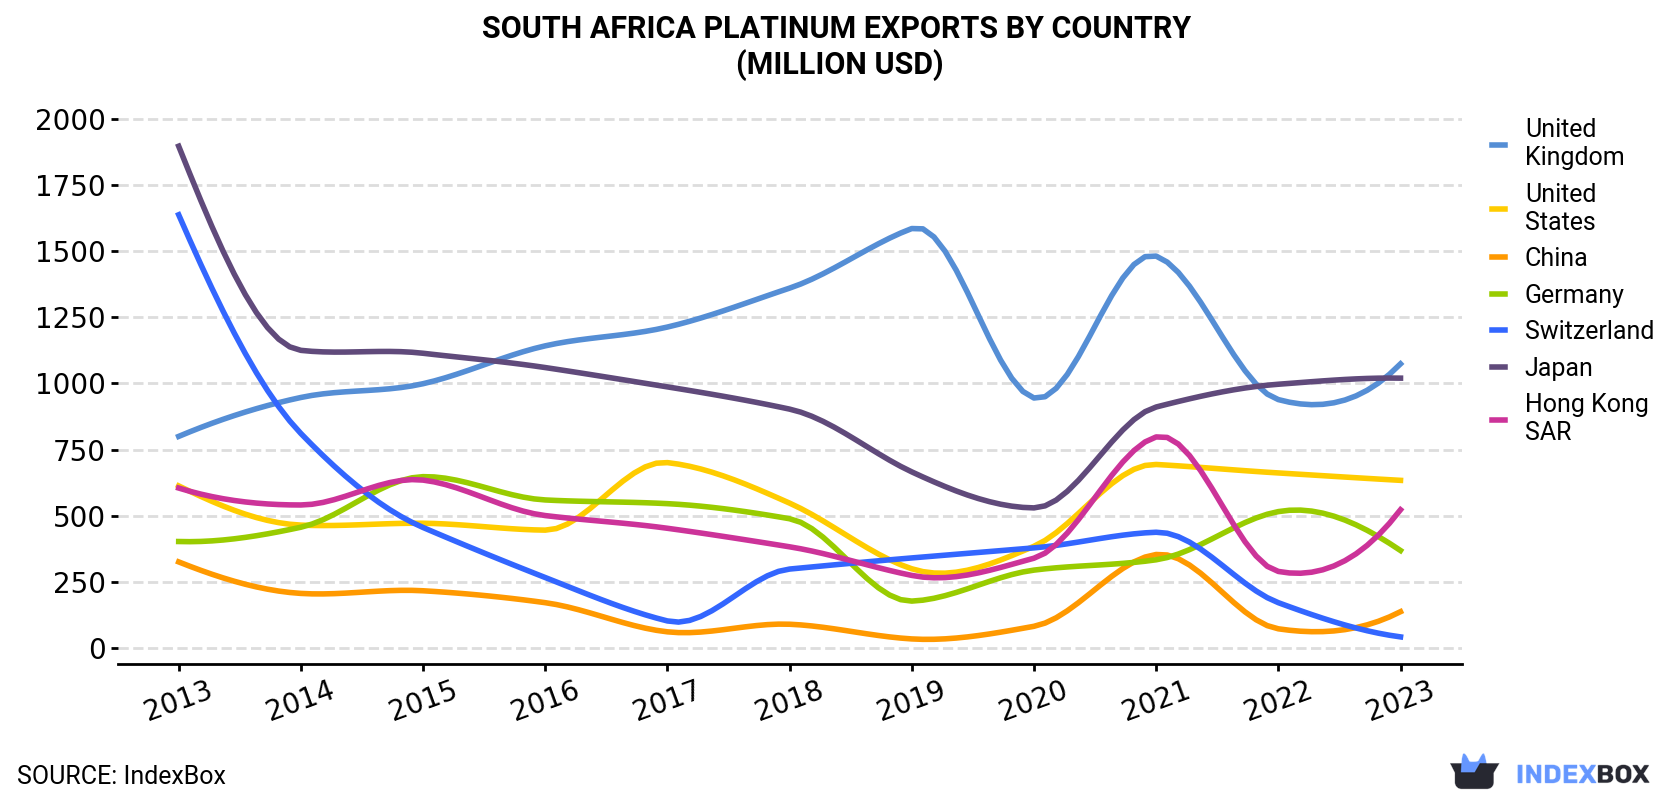 South Africa Platinum Exports By Country (Million USD)